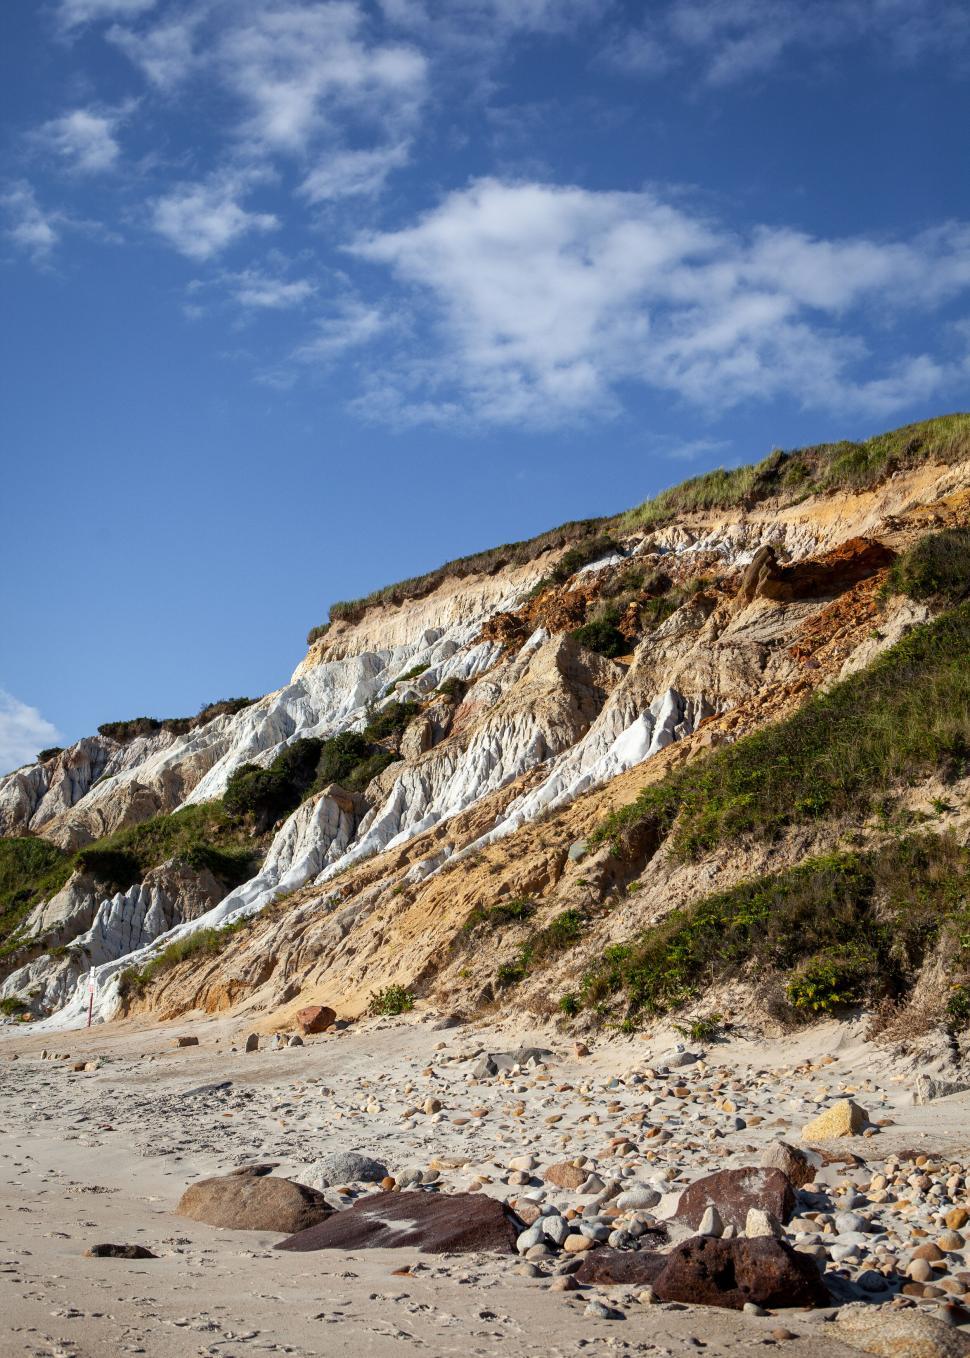 Free Image of Cliff face over a pebbled beach under blue sky 